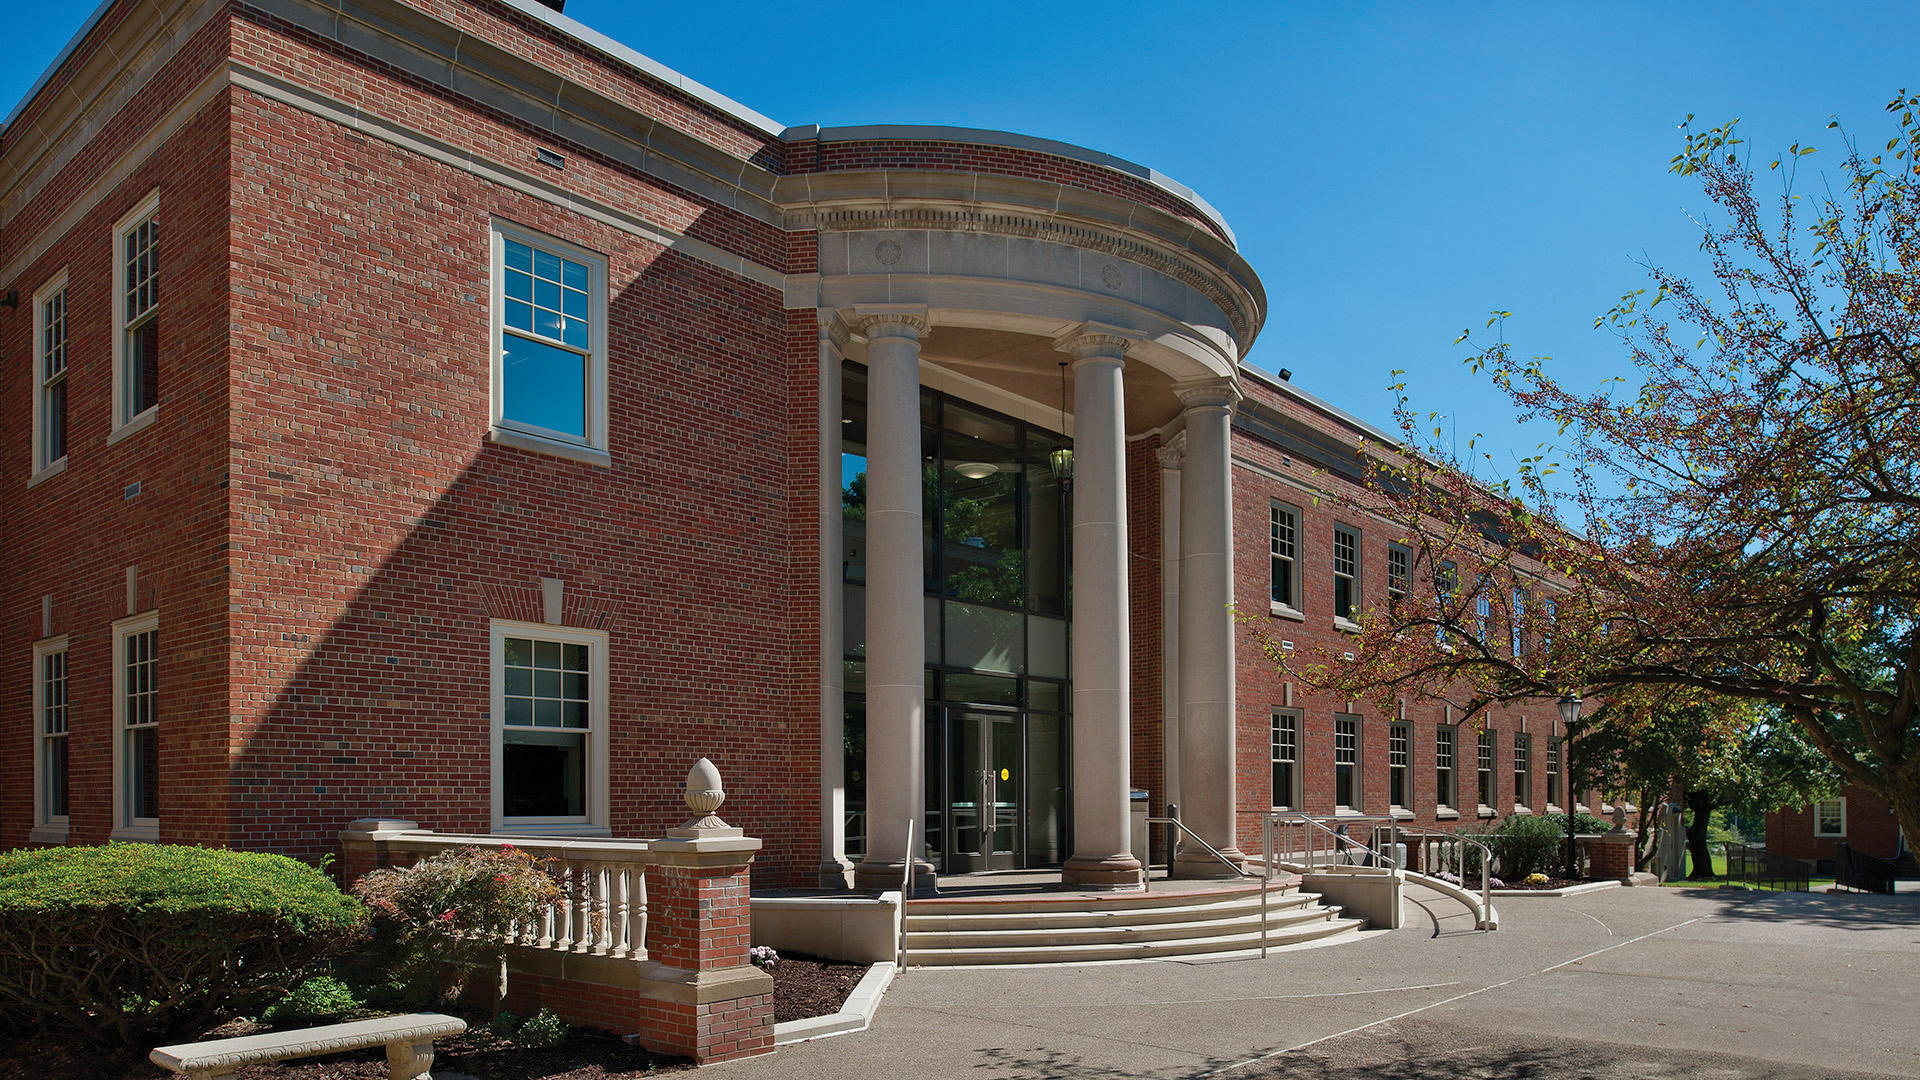 Barbour Library